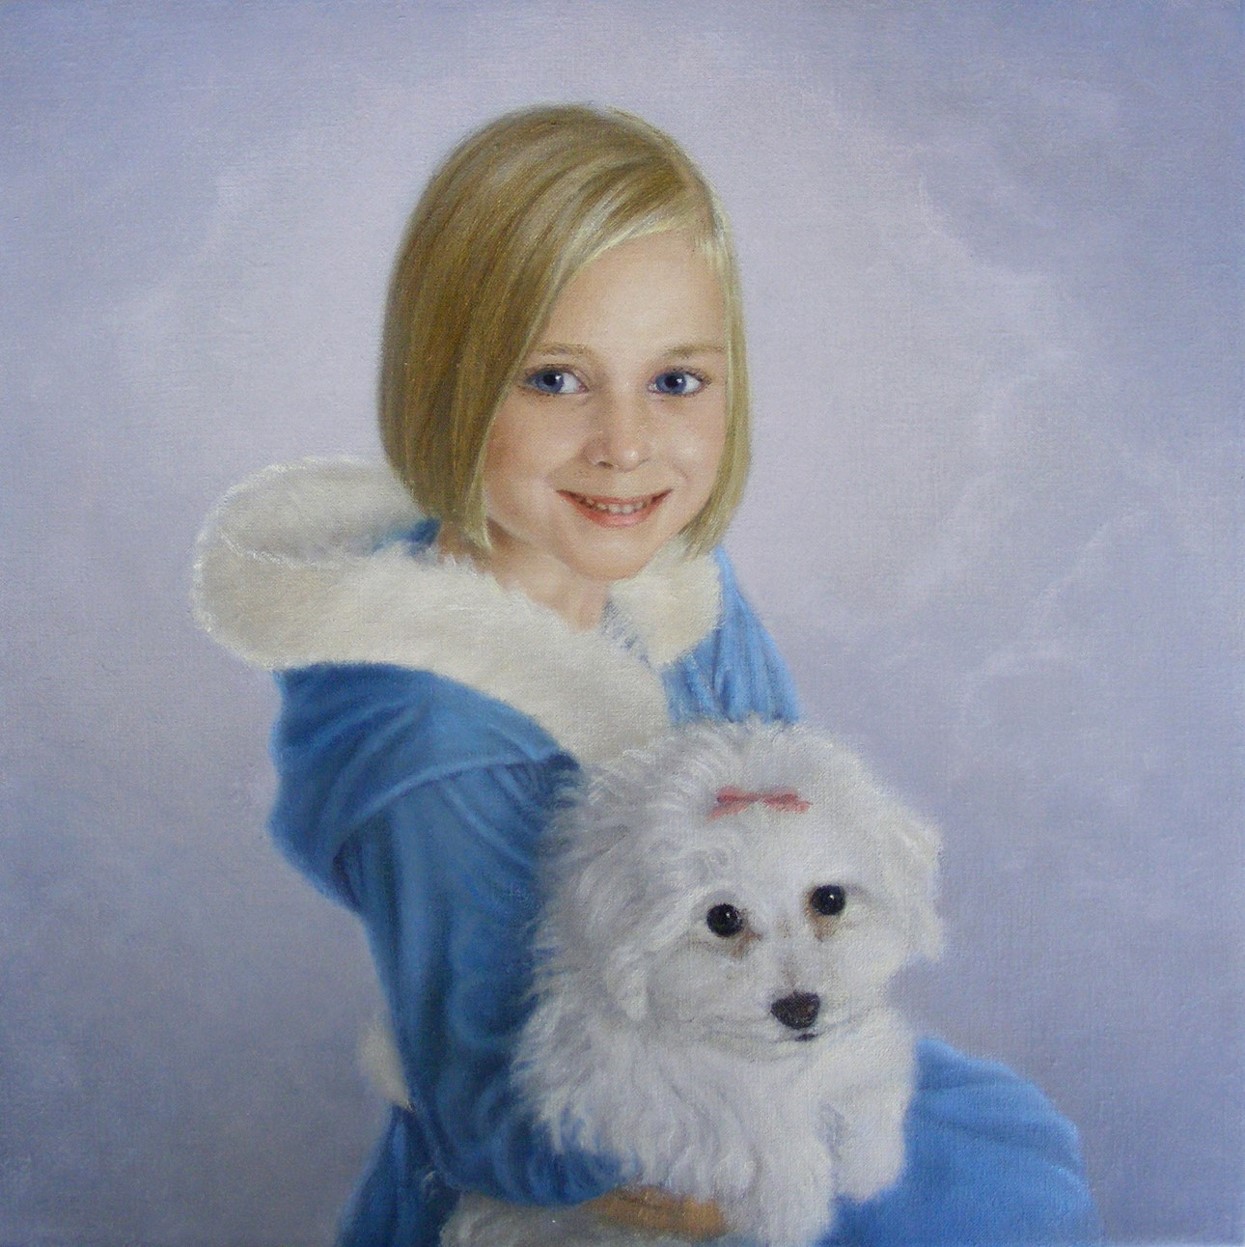 A Girl With A Dog by Yvonne Herd Arrowood